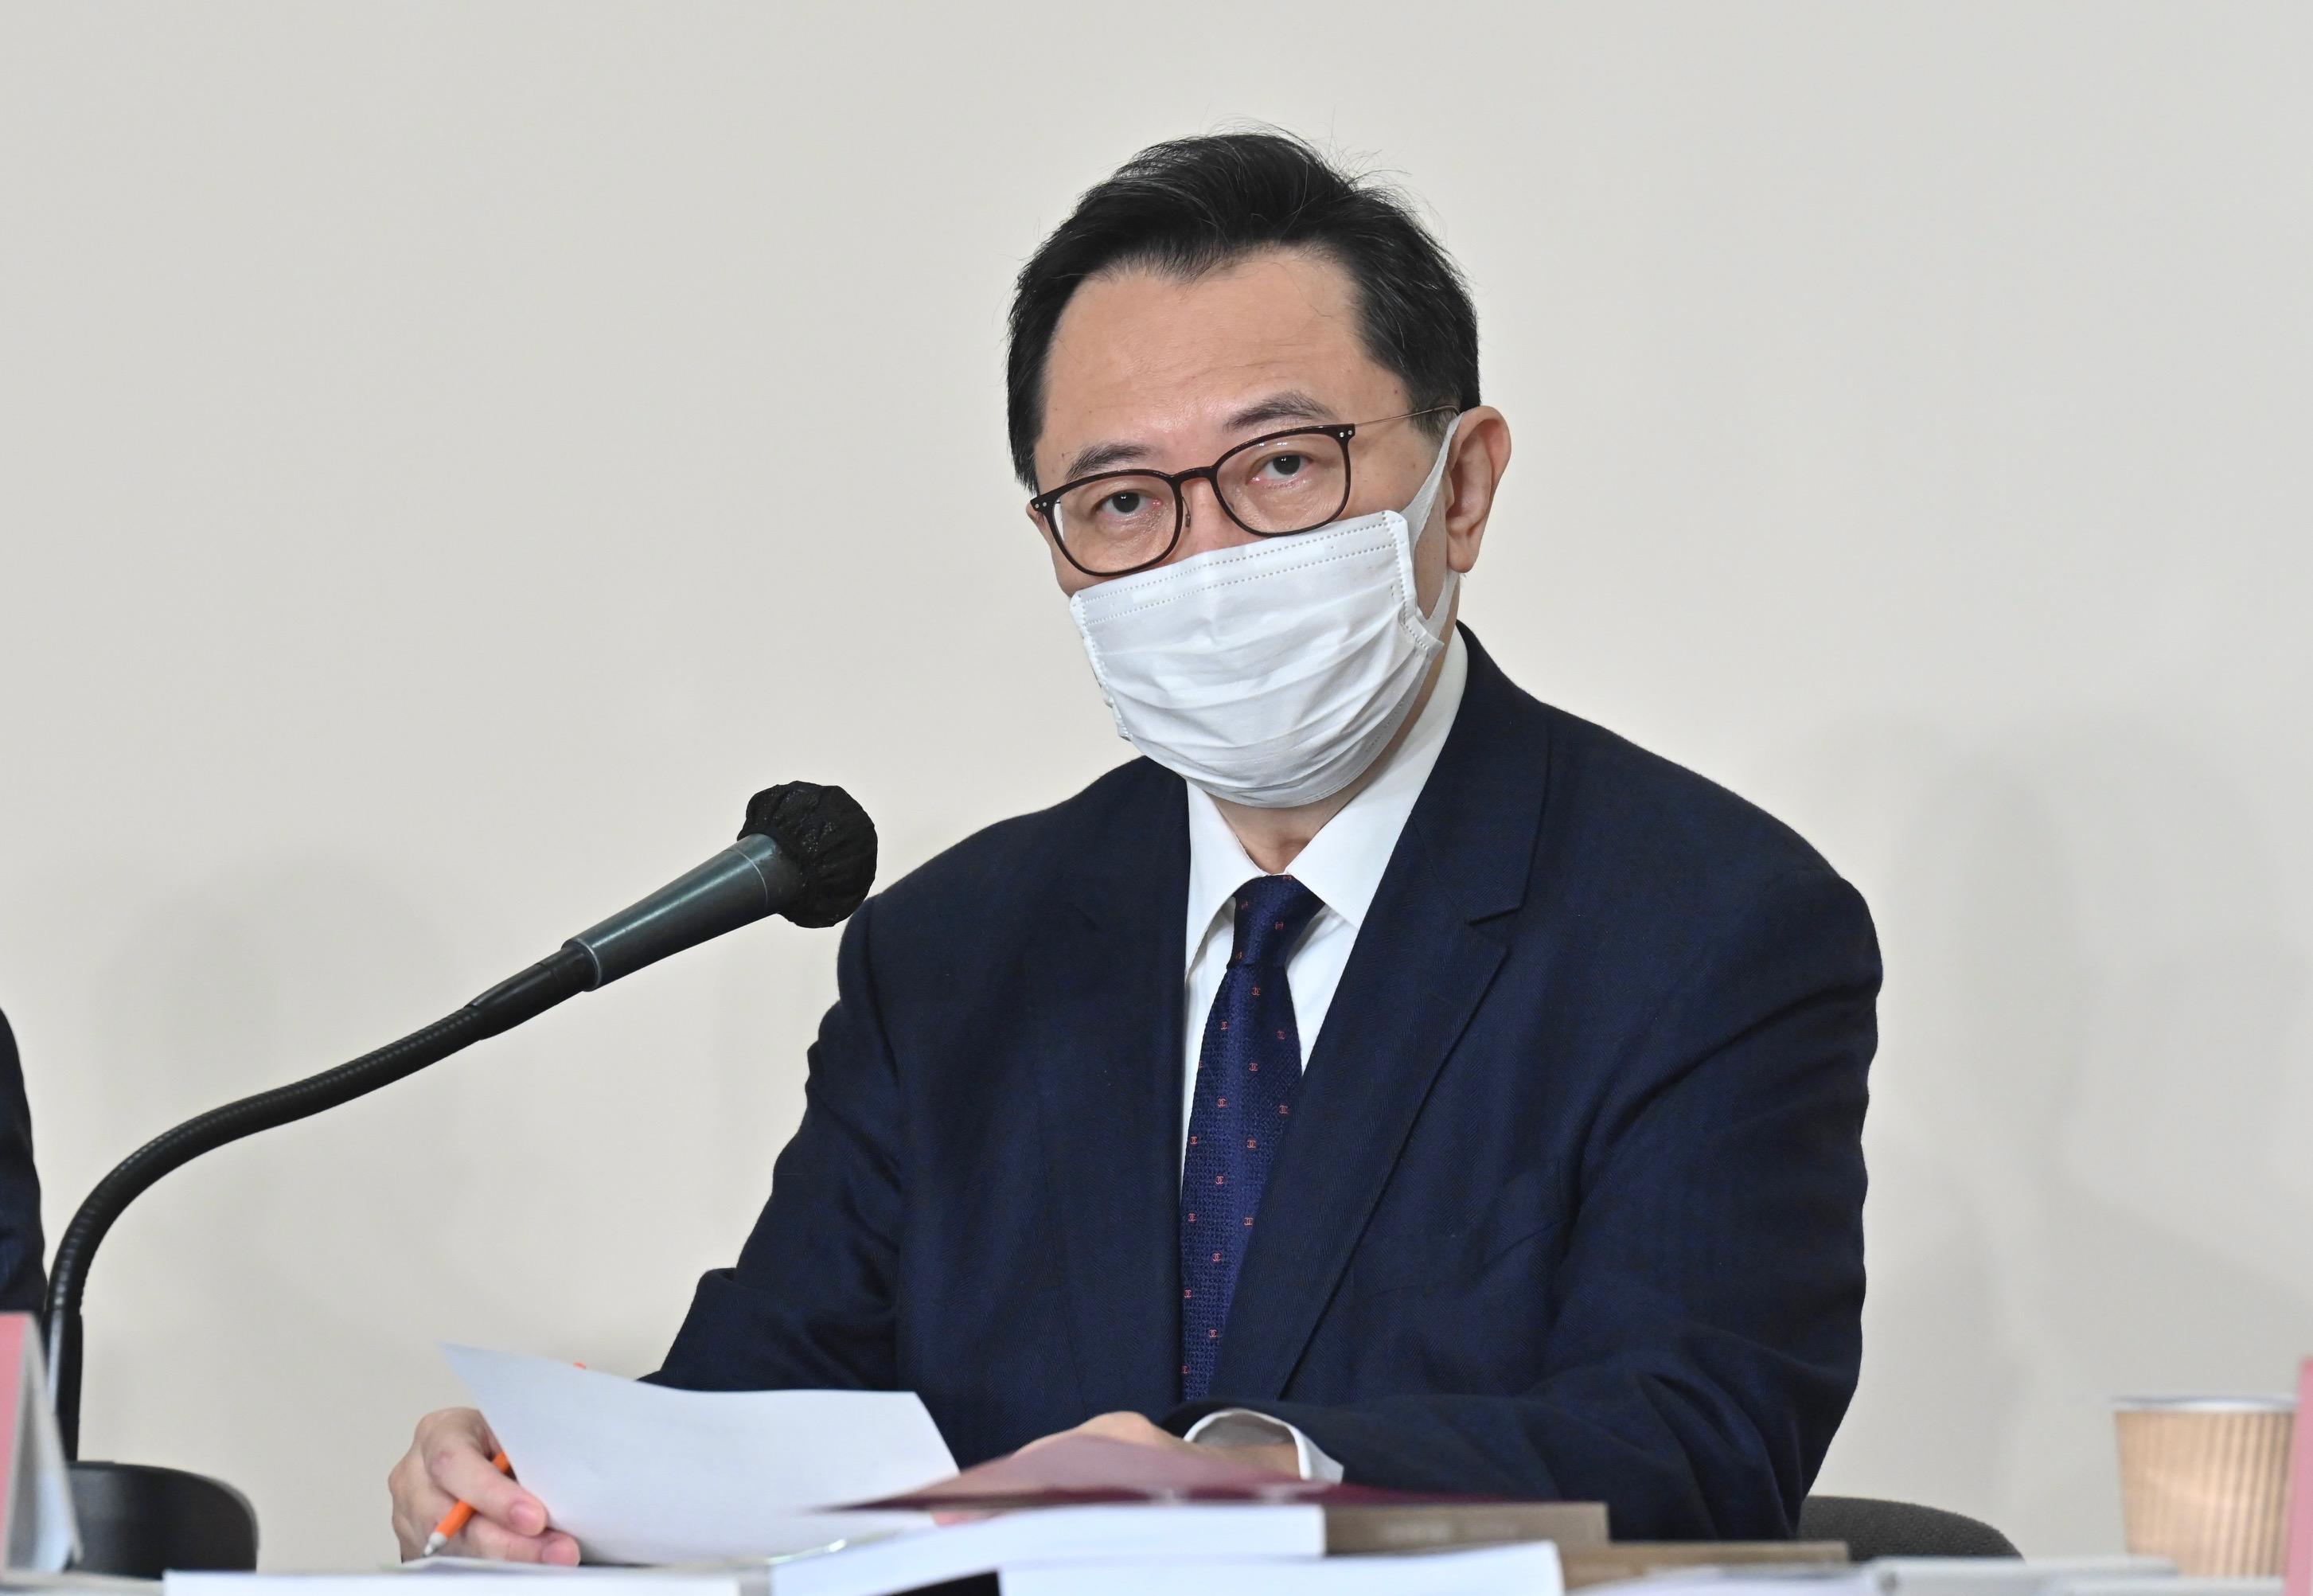 The Chairman of the Electoral Affairs Commission, Mr Justice Barnabas Fung Wah, briefed online the candidate of the 2022 Chief Executive Election and his electioneering team today (April 22) on important points to note in running the election campaign, and relevant electoral arrangements.